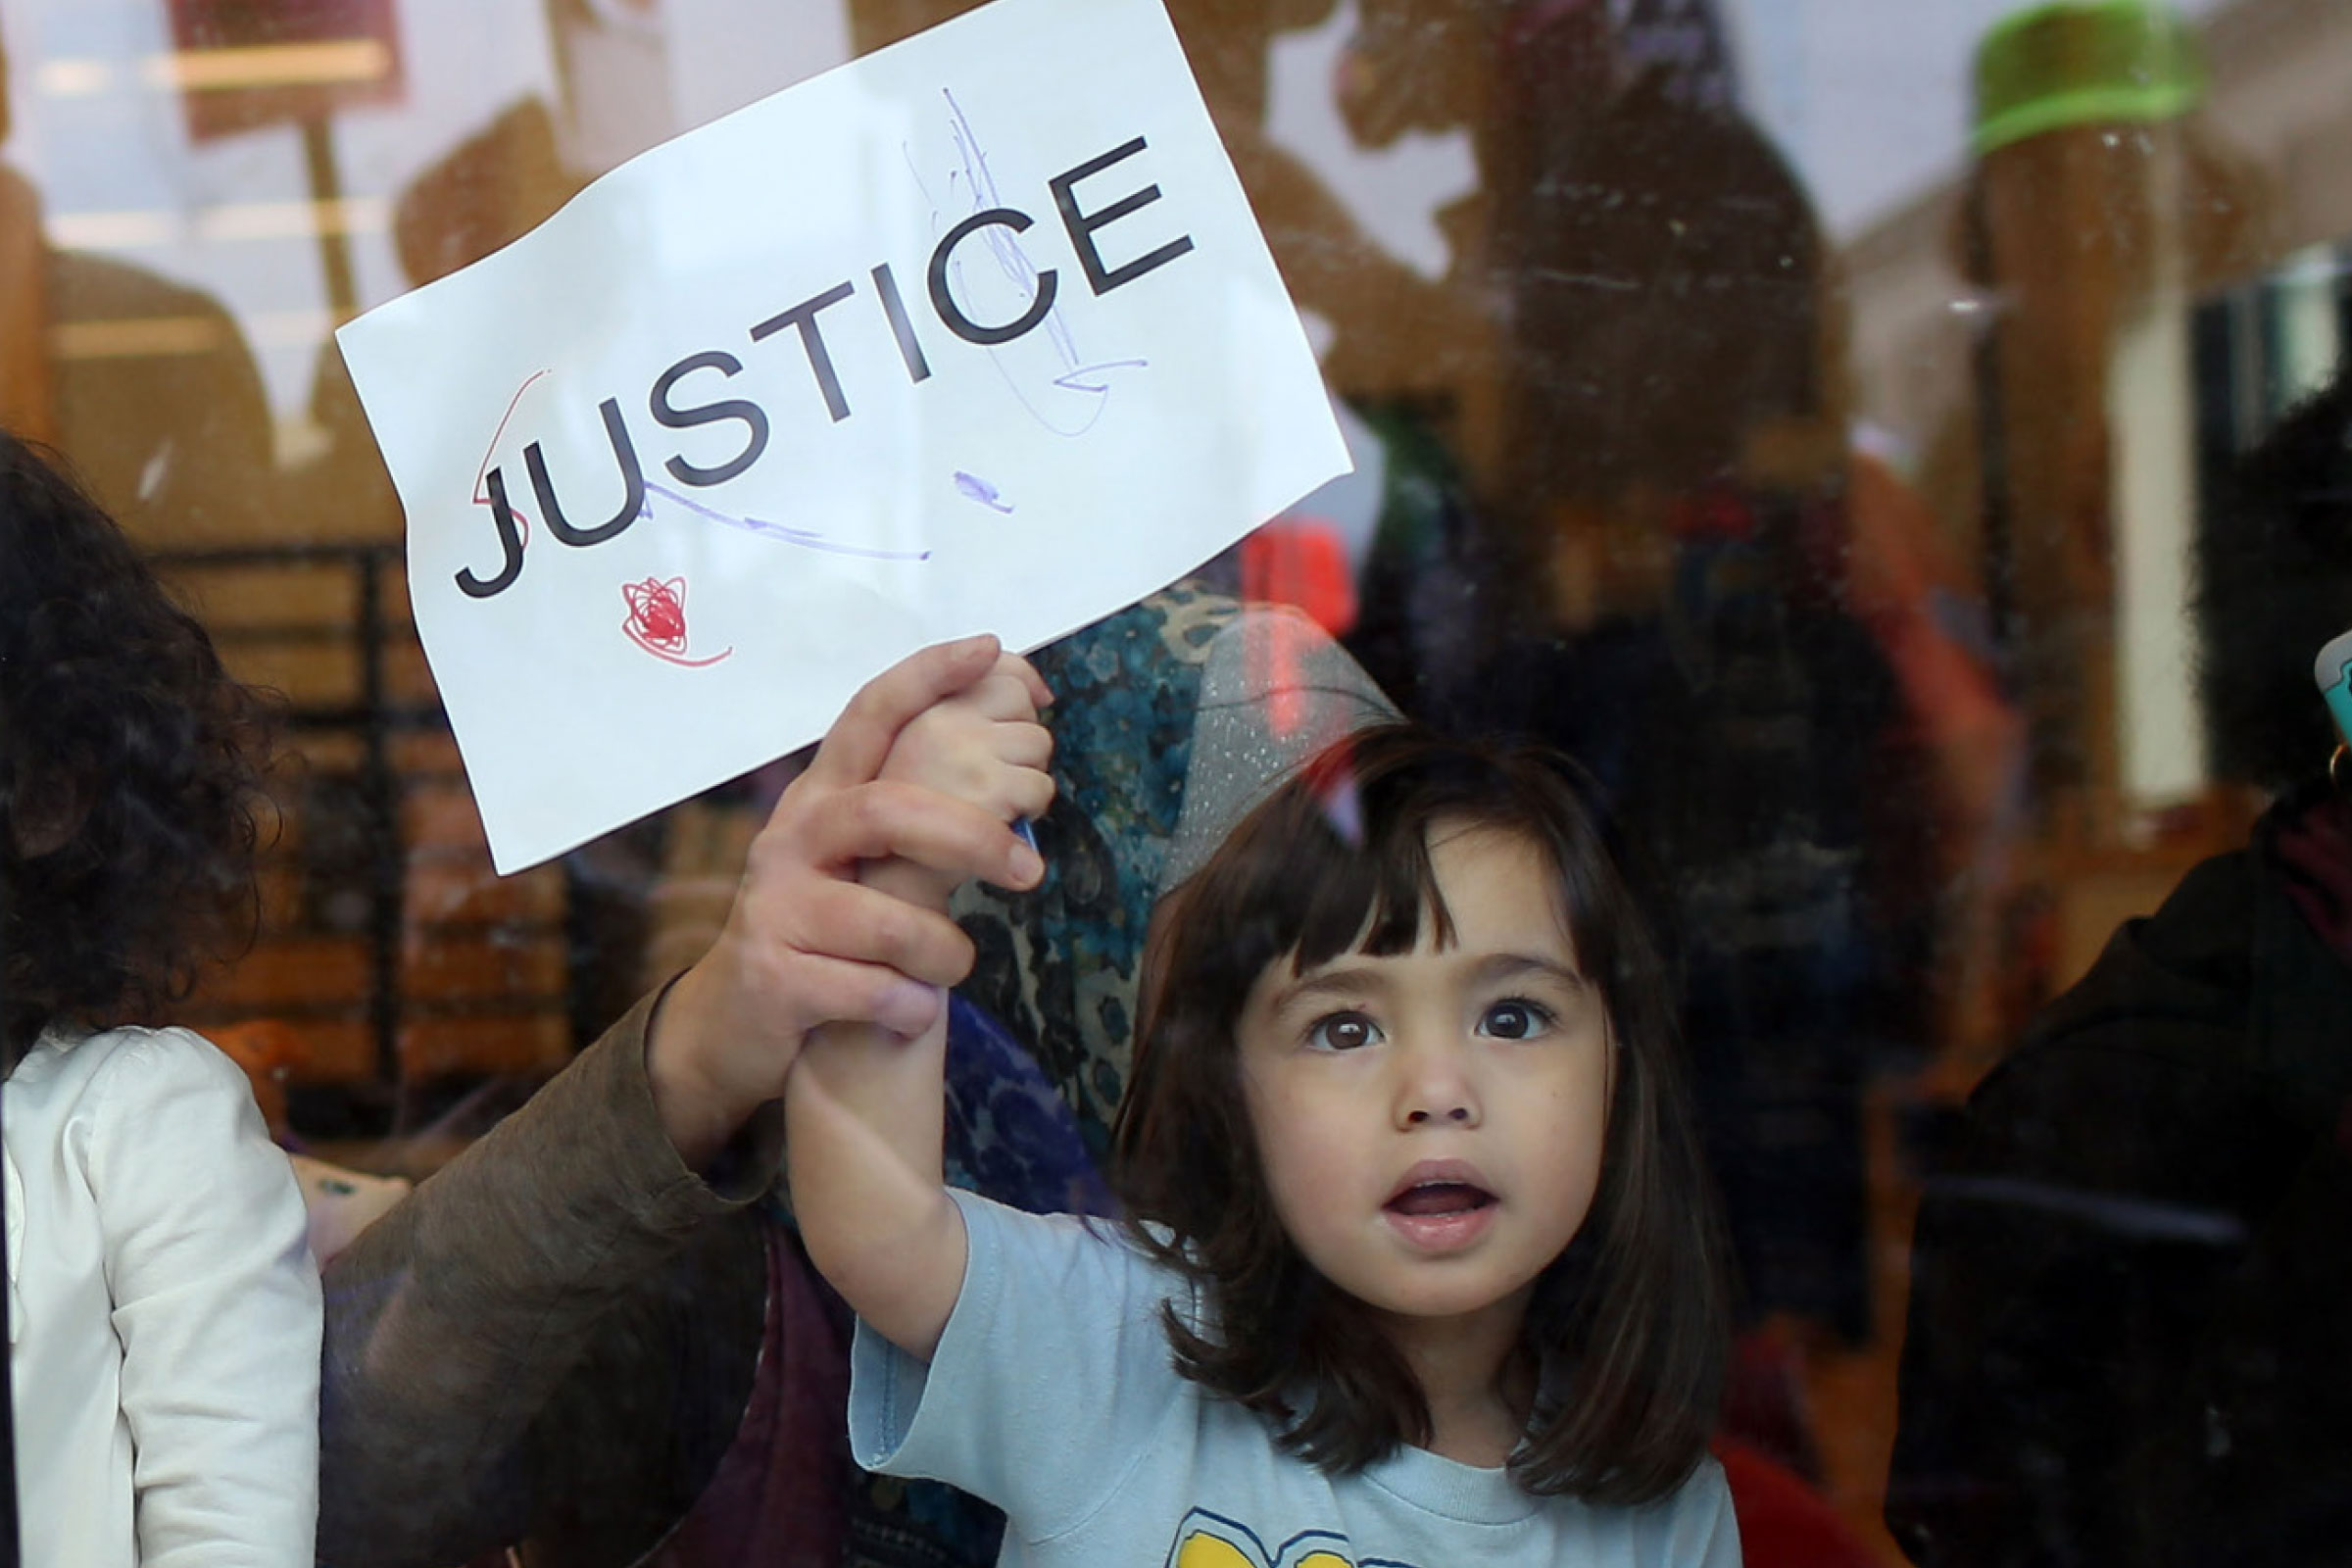 child holding a sign that says 'justice'